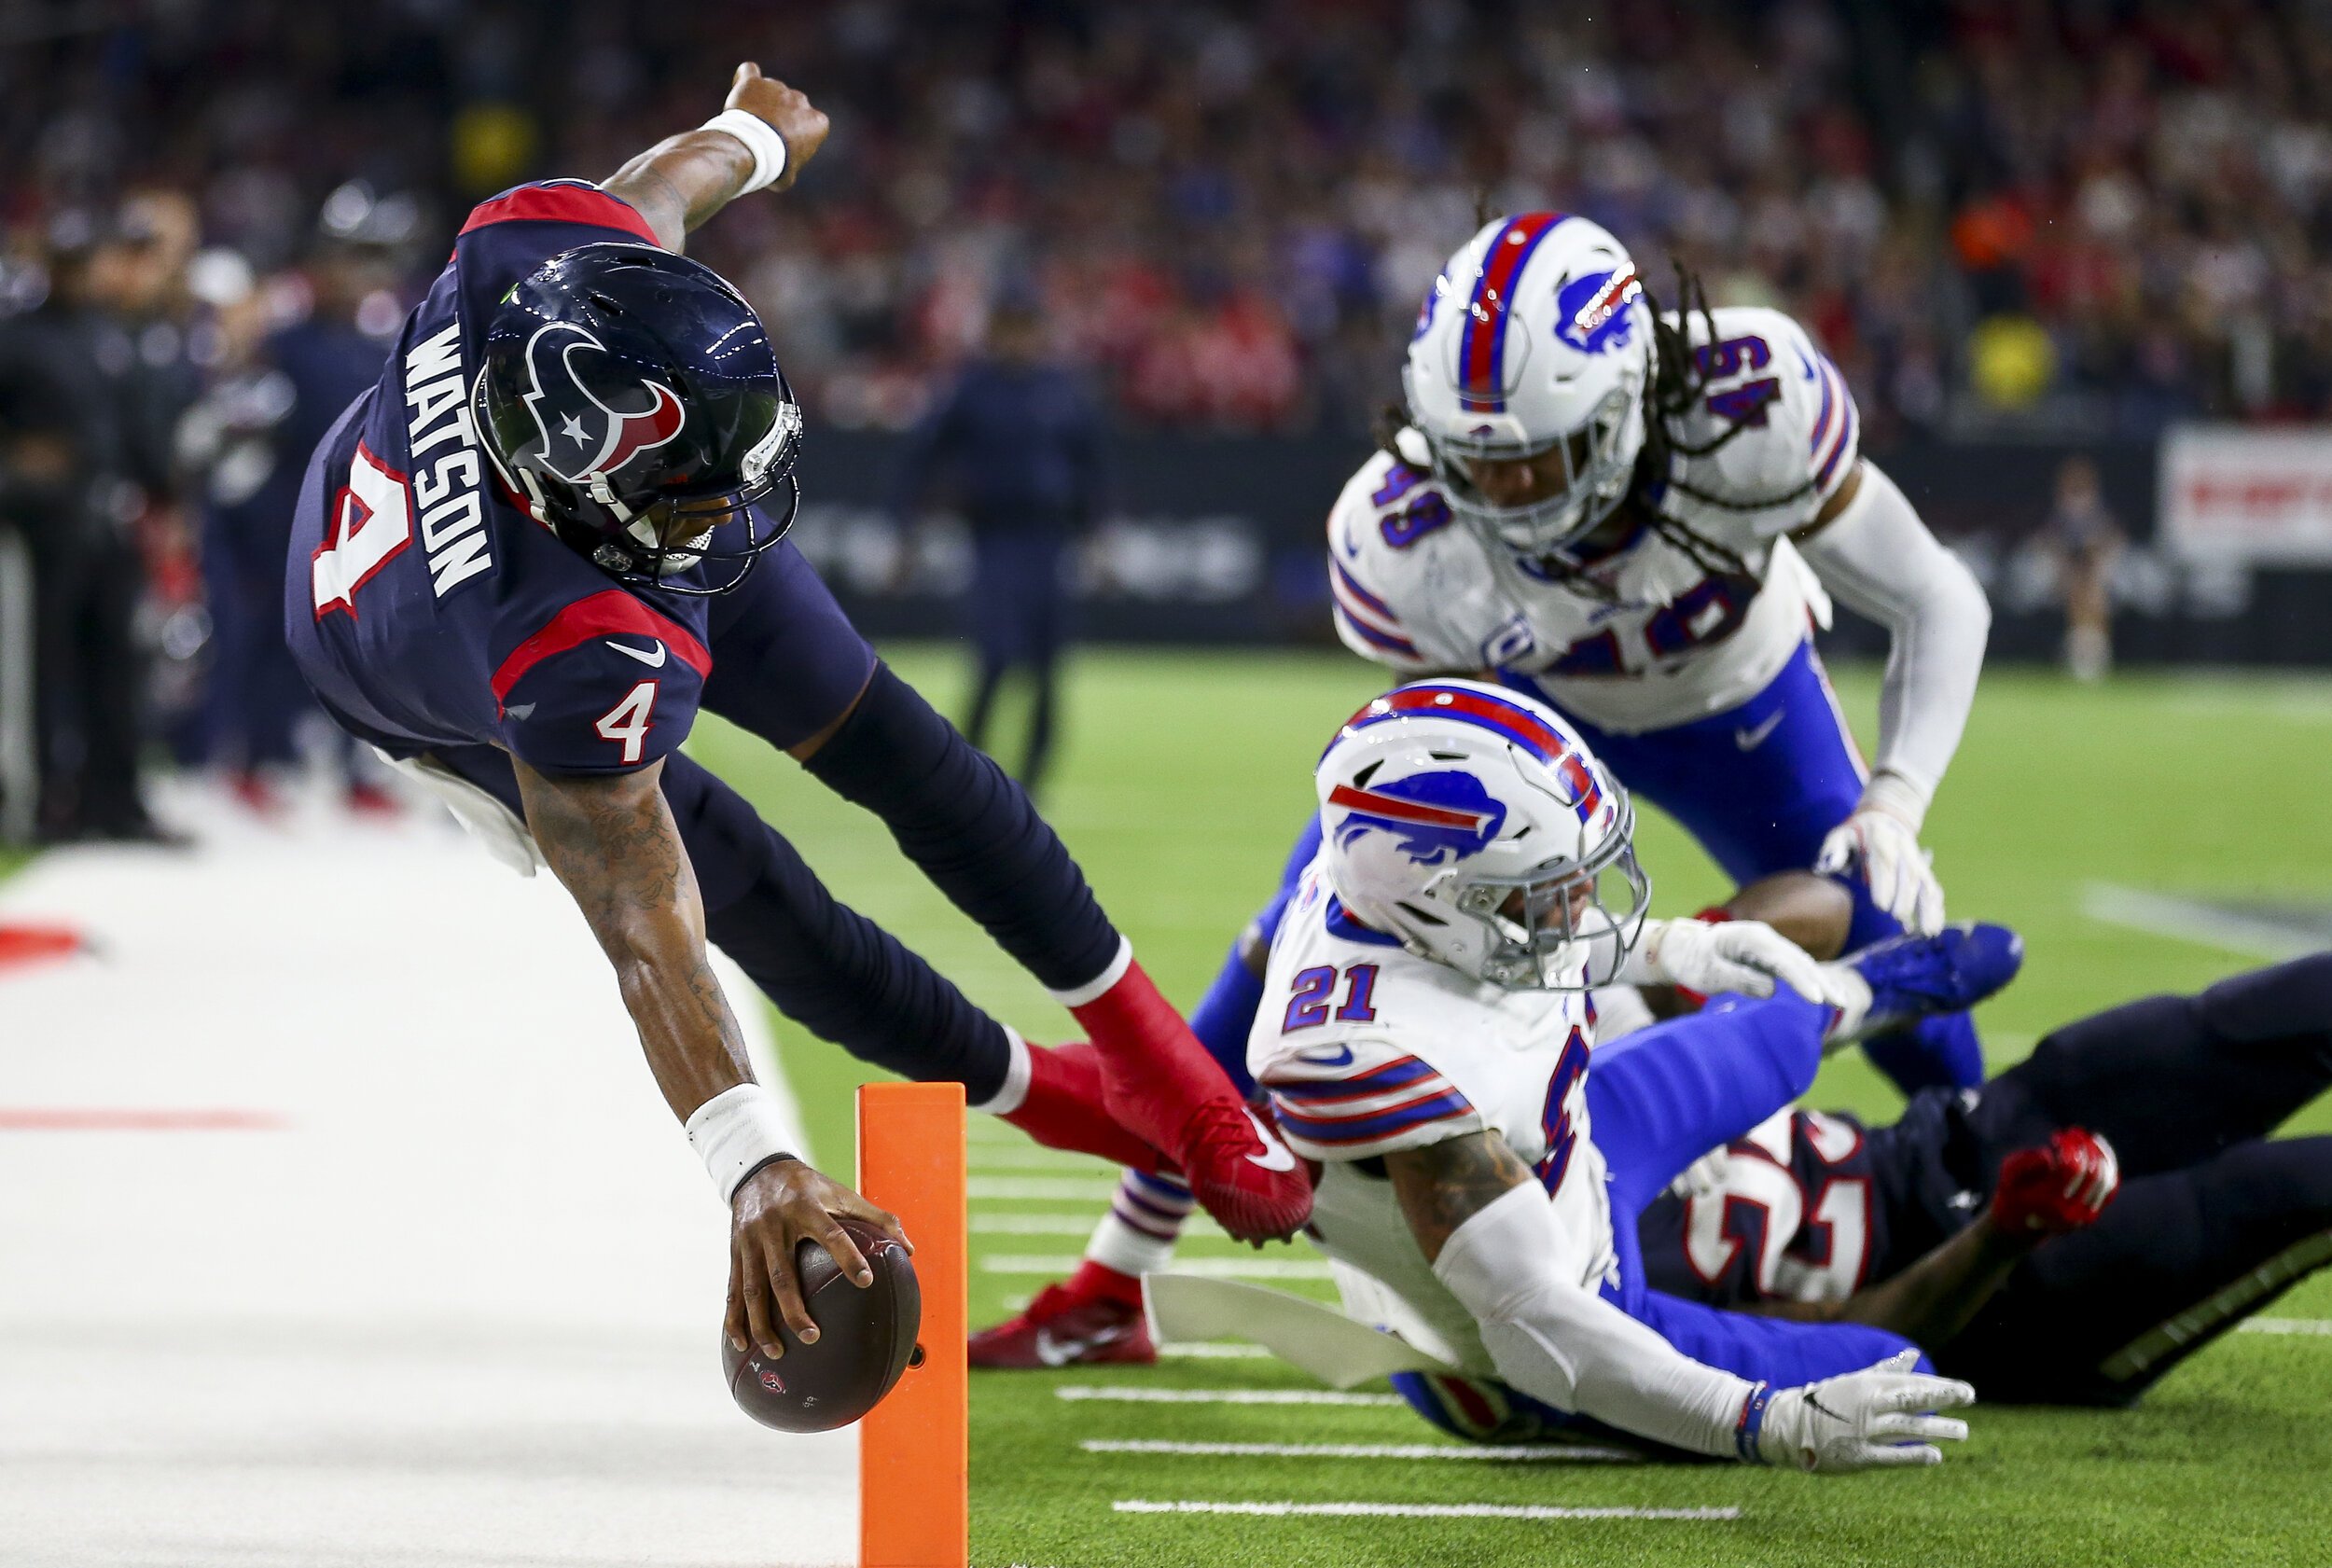  Houston Texans quarterback Deshaun Watson (4) stretches the ball across the goal line to get a two-point conversion against the Buffalo Bills during the third quarter of an AFC Wild Card playoff game at NRG Stadium Saturday, Jan. 4, 2020, in Houston